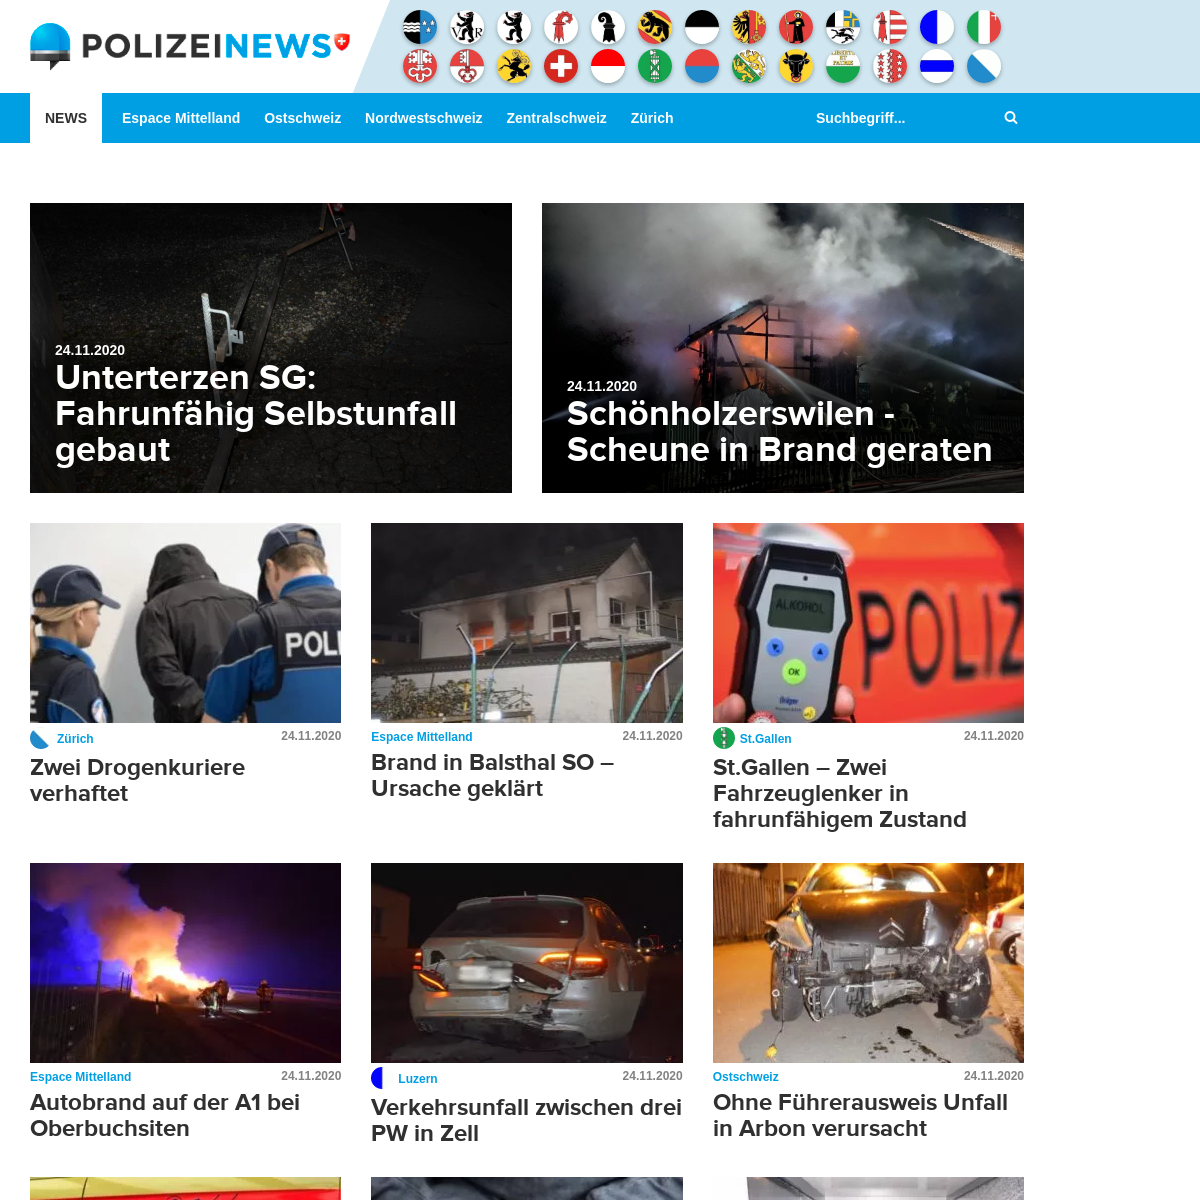 A complete backup of polizeinews.ch